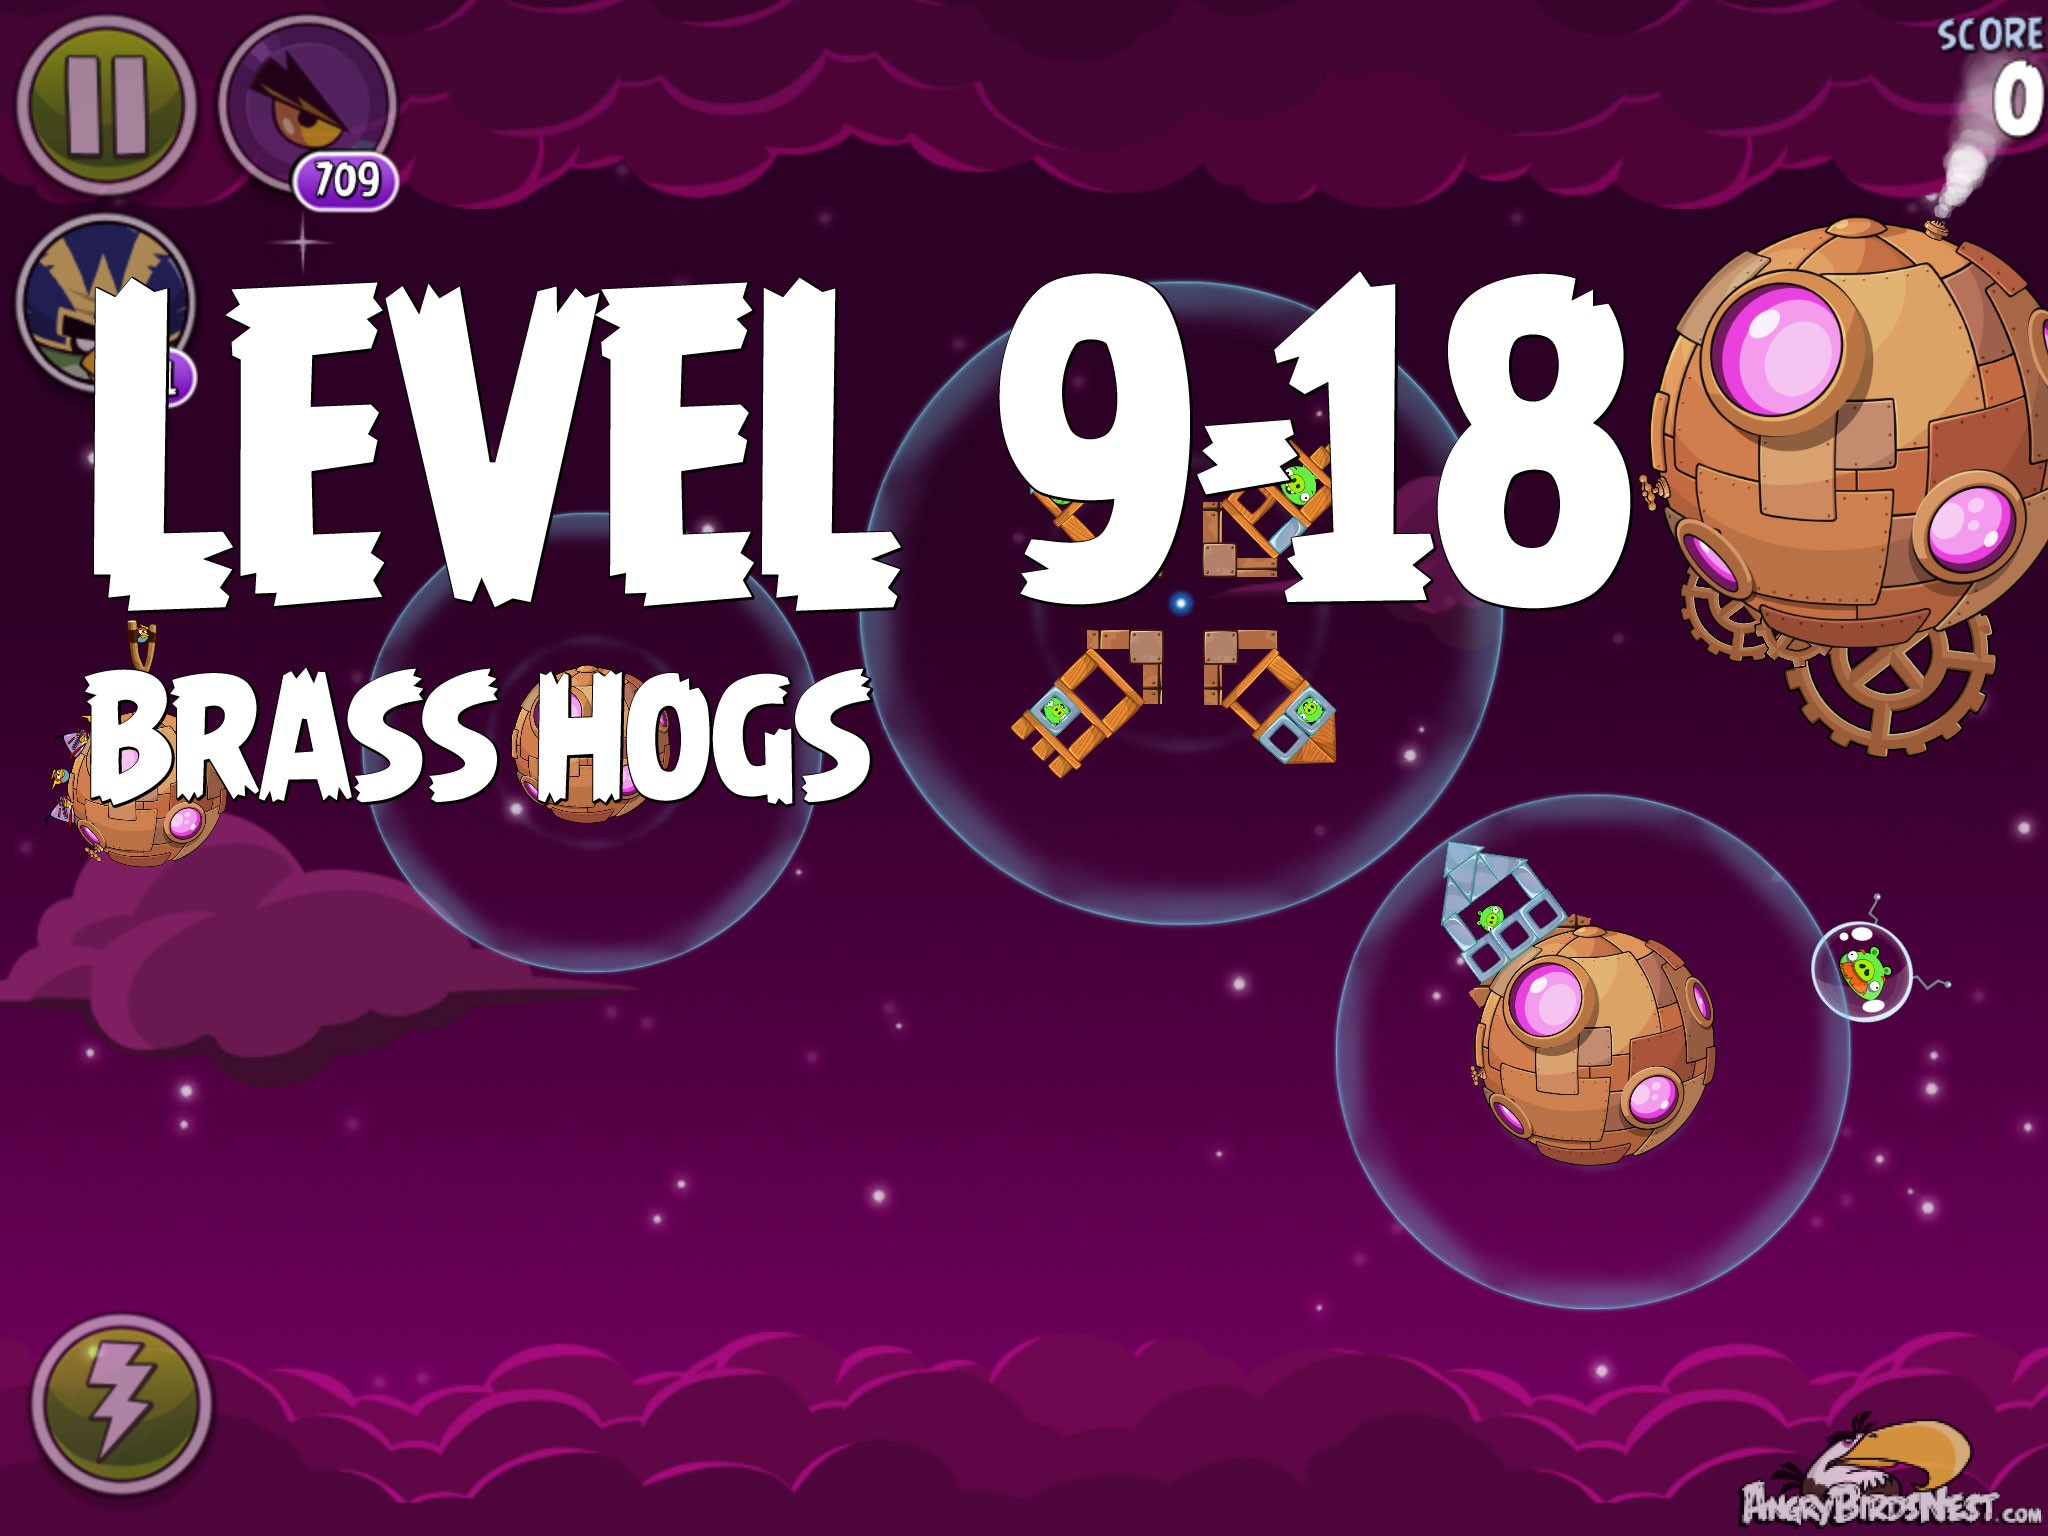 Angry Birds Space Brass Hogs Level 9-18